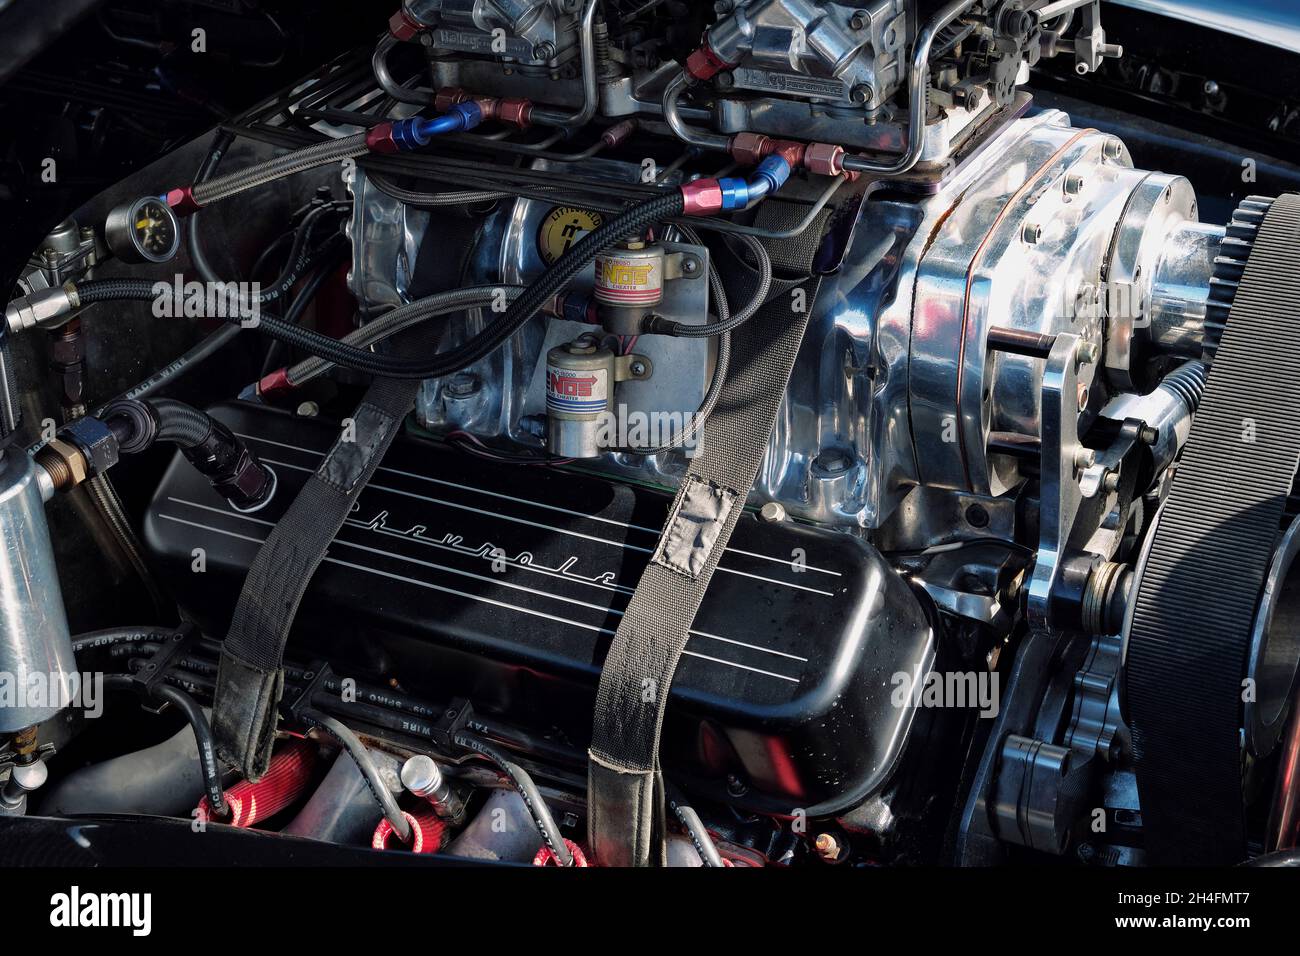 A high performance Chevrolet engine with turbocharger and hold-down straps at the 2021 Endless Summer Cruisin in Ocean City Maryland. Stock Photo